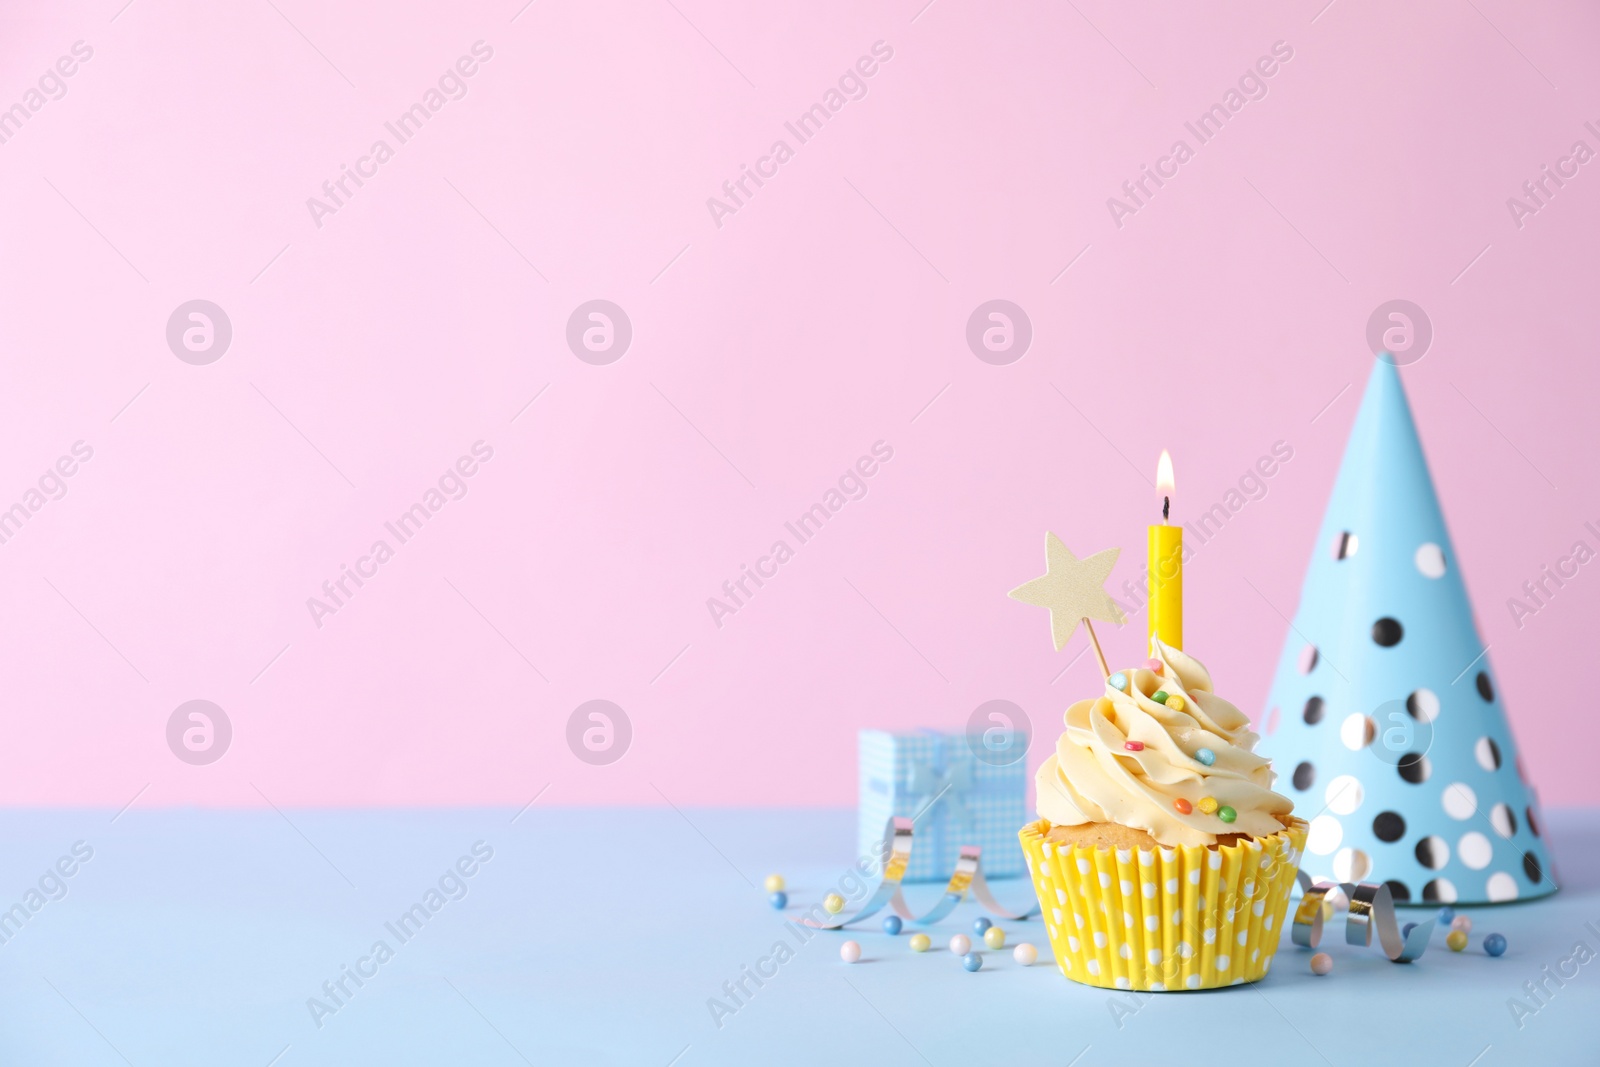 Photo of Delicious birthday cupcake with burning candle, party decor and gift box on light blue table against pink background, space for text